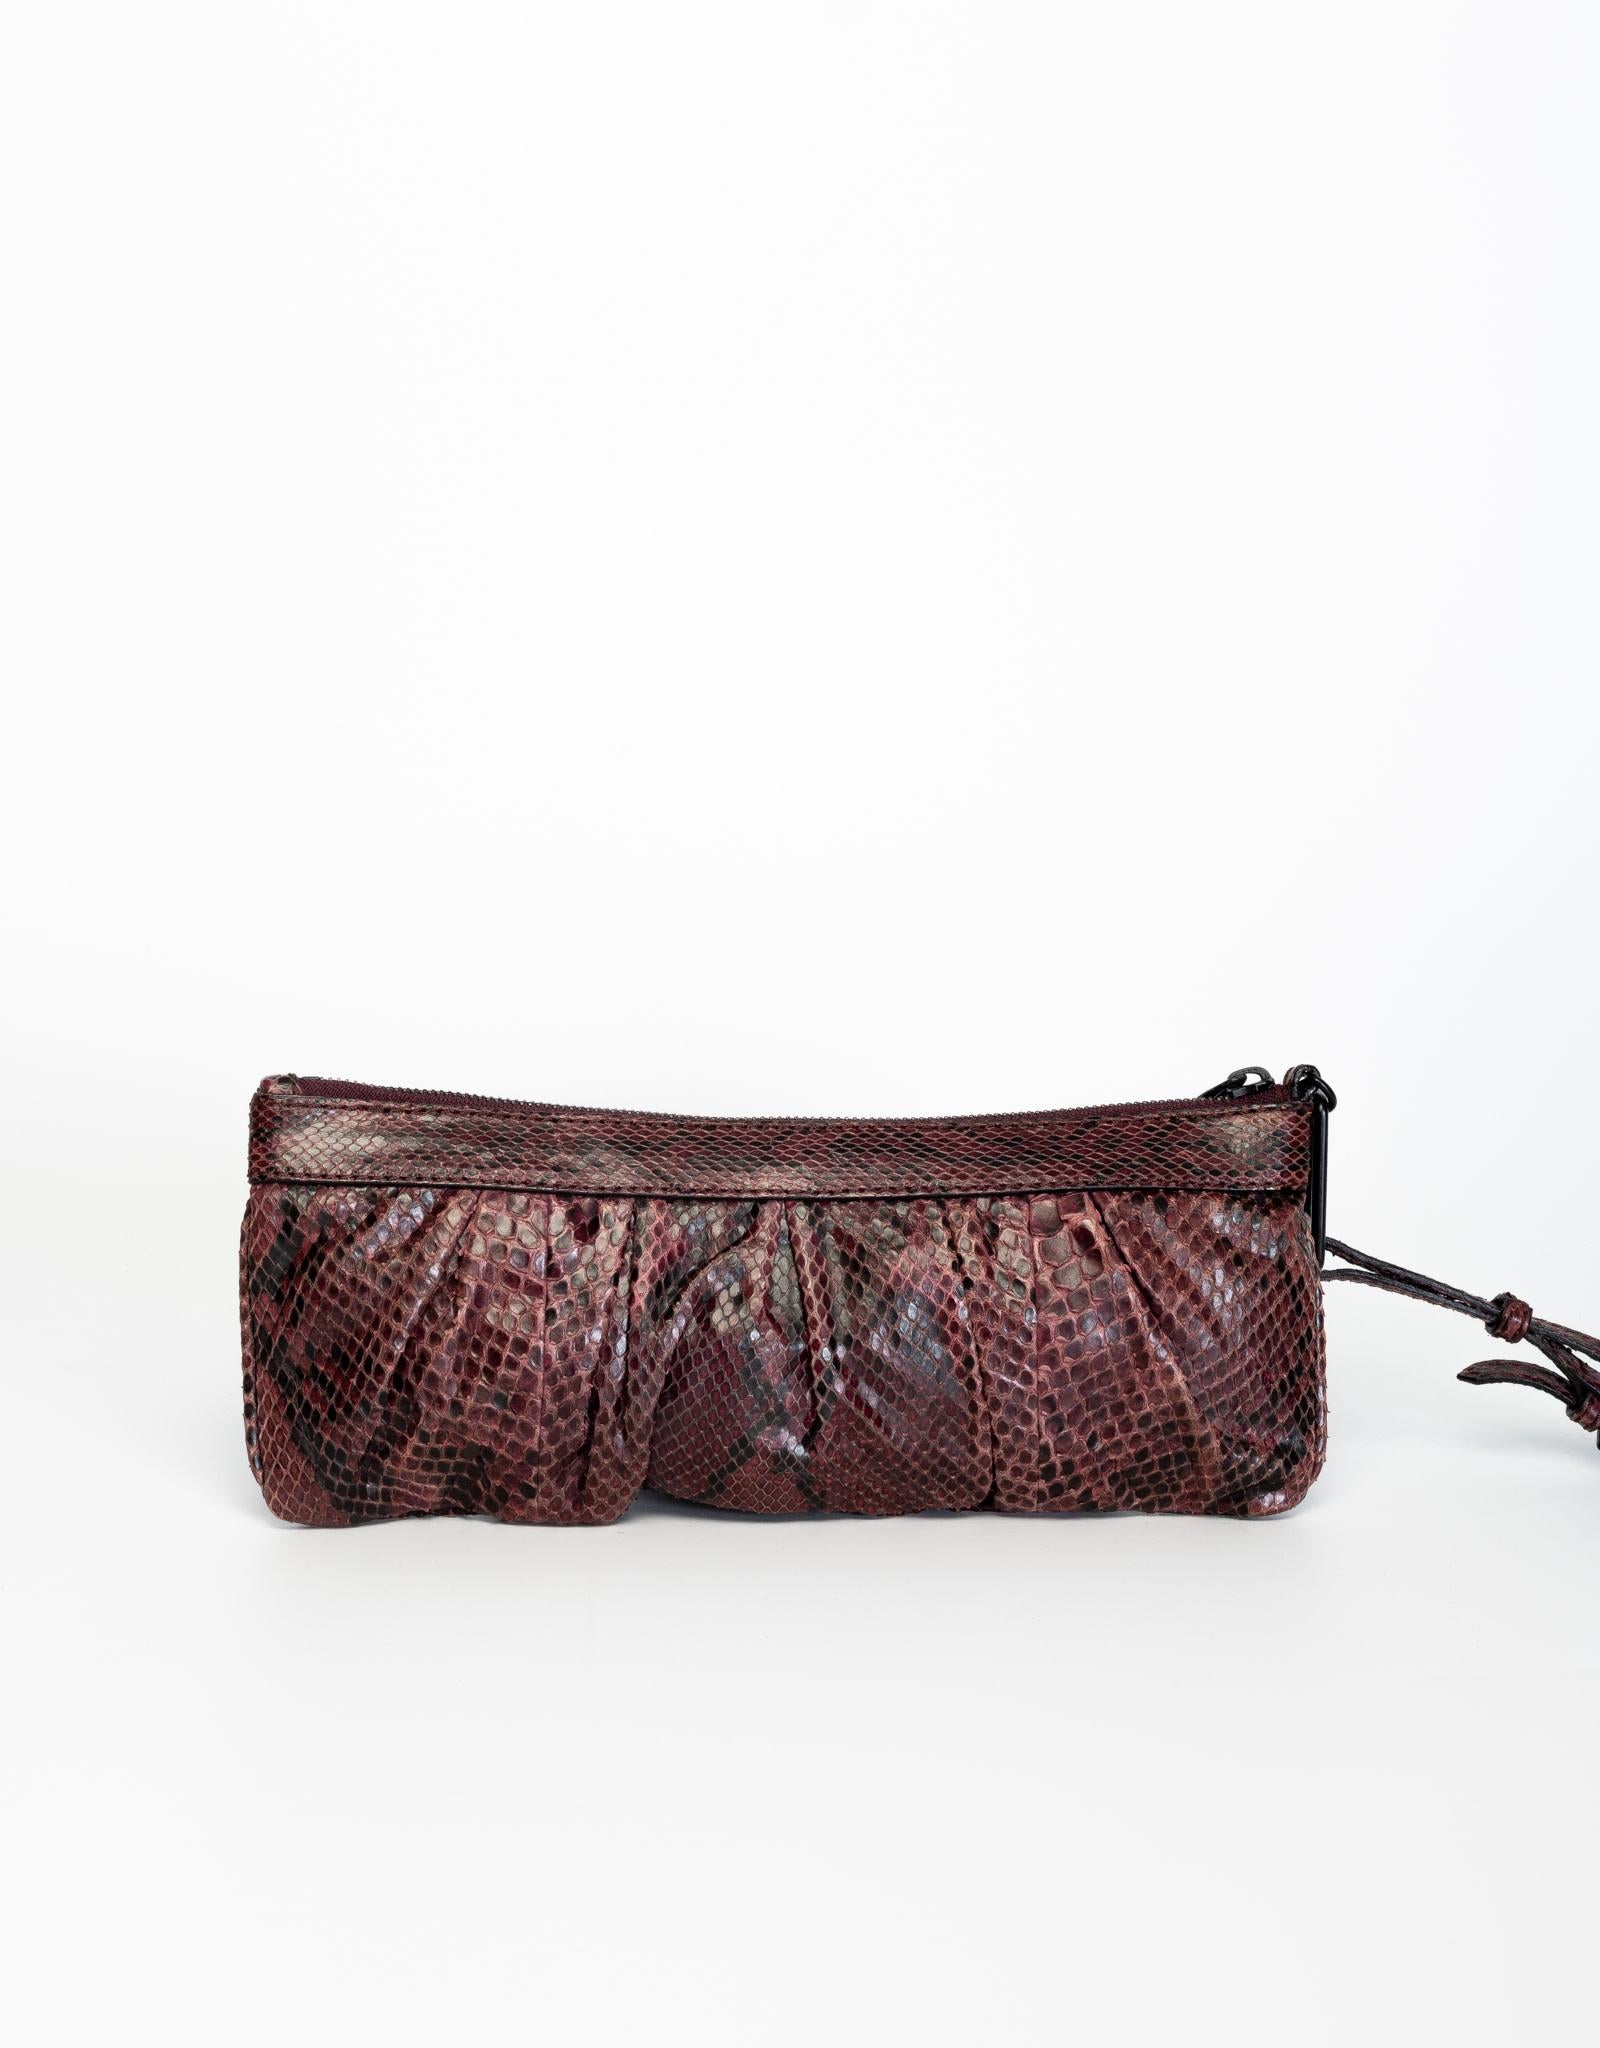 This clutch by Burberry is made of dyed snake skin and features a black top zipper closure, a snake skin strap and a cloth interior.

COLOR: Purple
MATERIAL: Python
ITEM CODE: ITEFFEPI14SCA
MEASURES: H 4.5” x L 11.5” x D 0.75” 
COMES WITH: Tags,